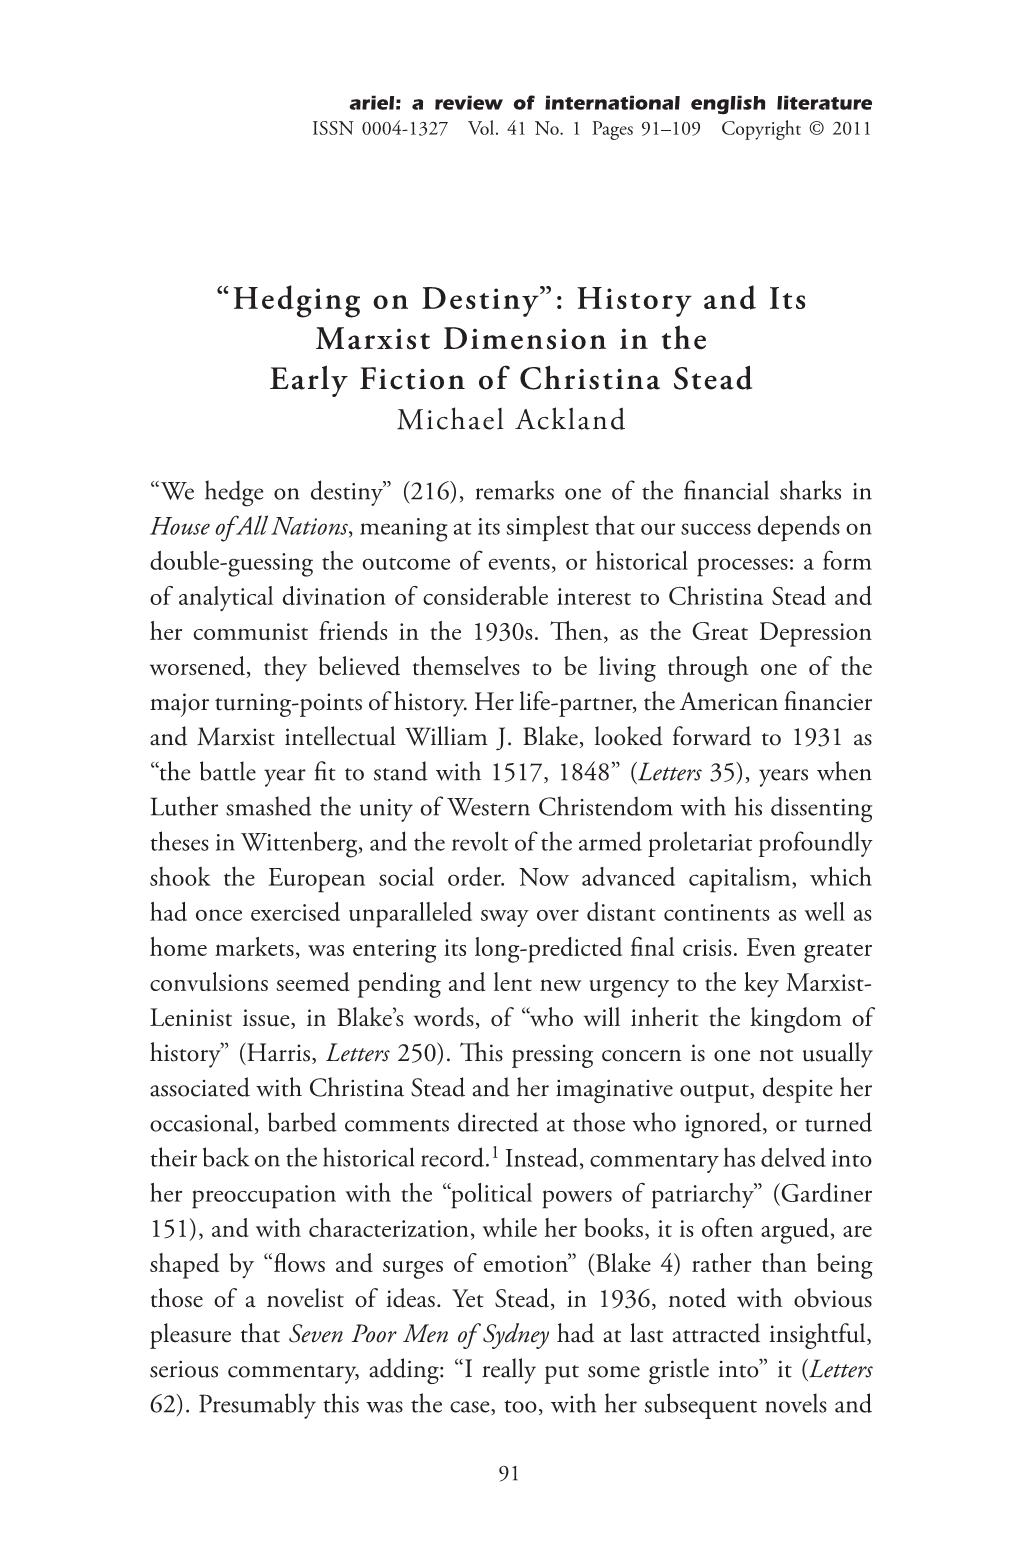 “Hedging on Destiny”: History and Its Marxist Dimension in the Early Fiction of Christina Stead Michael Ackland